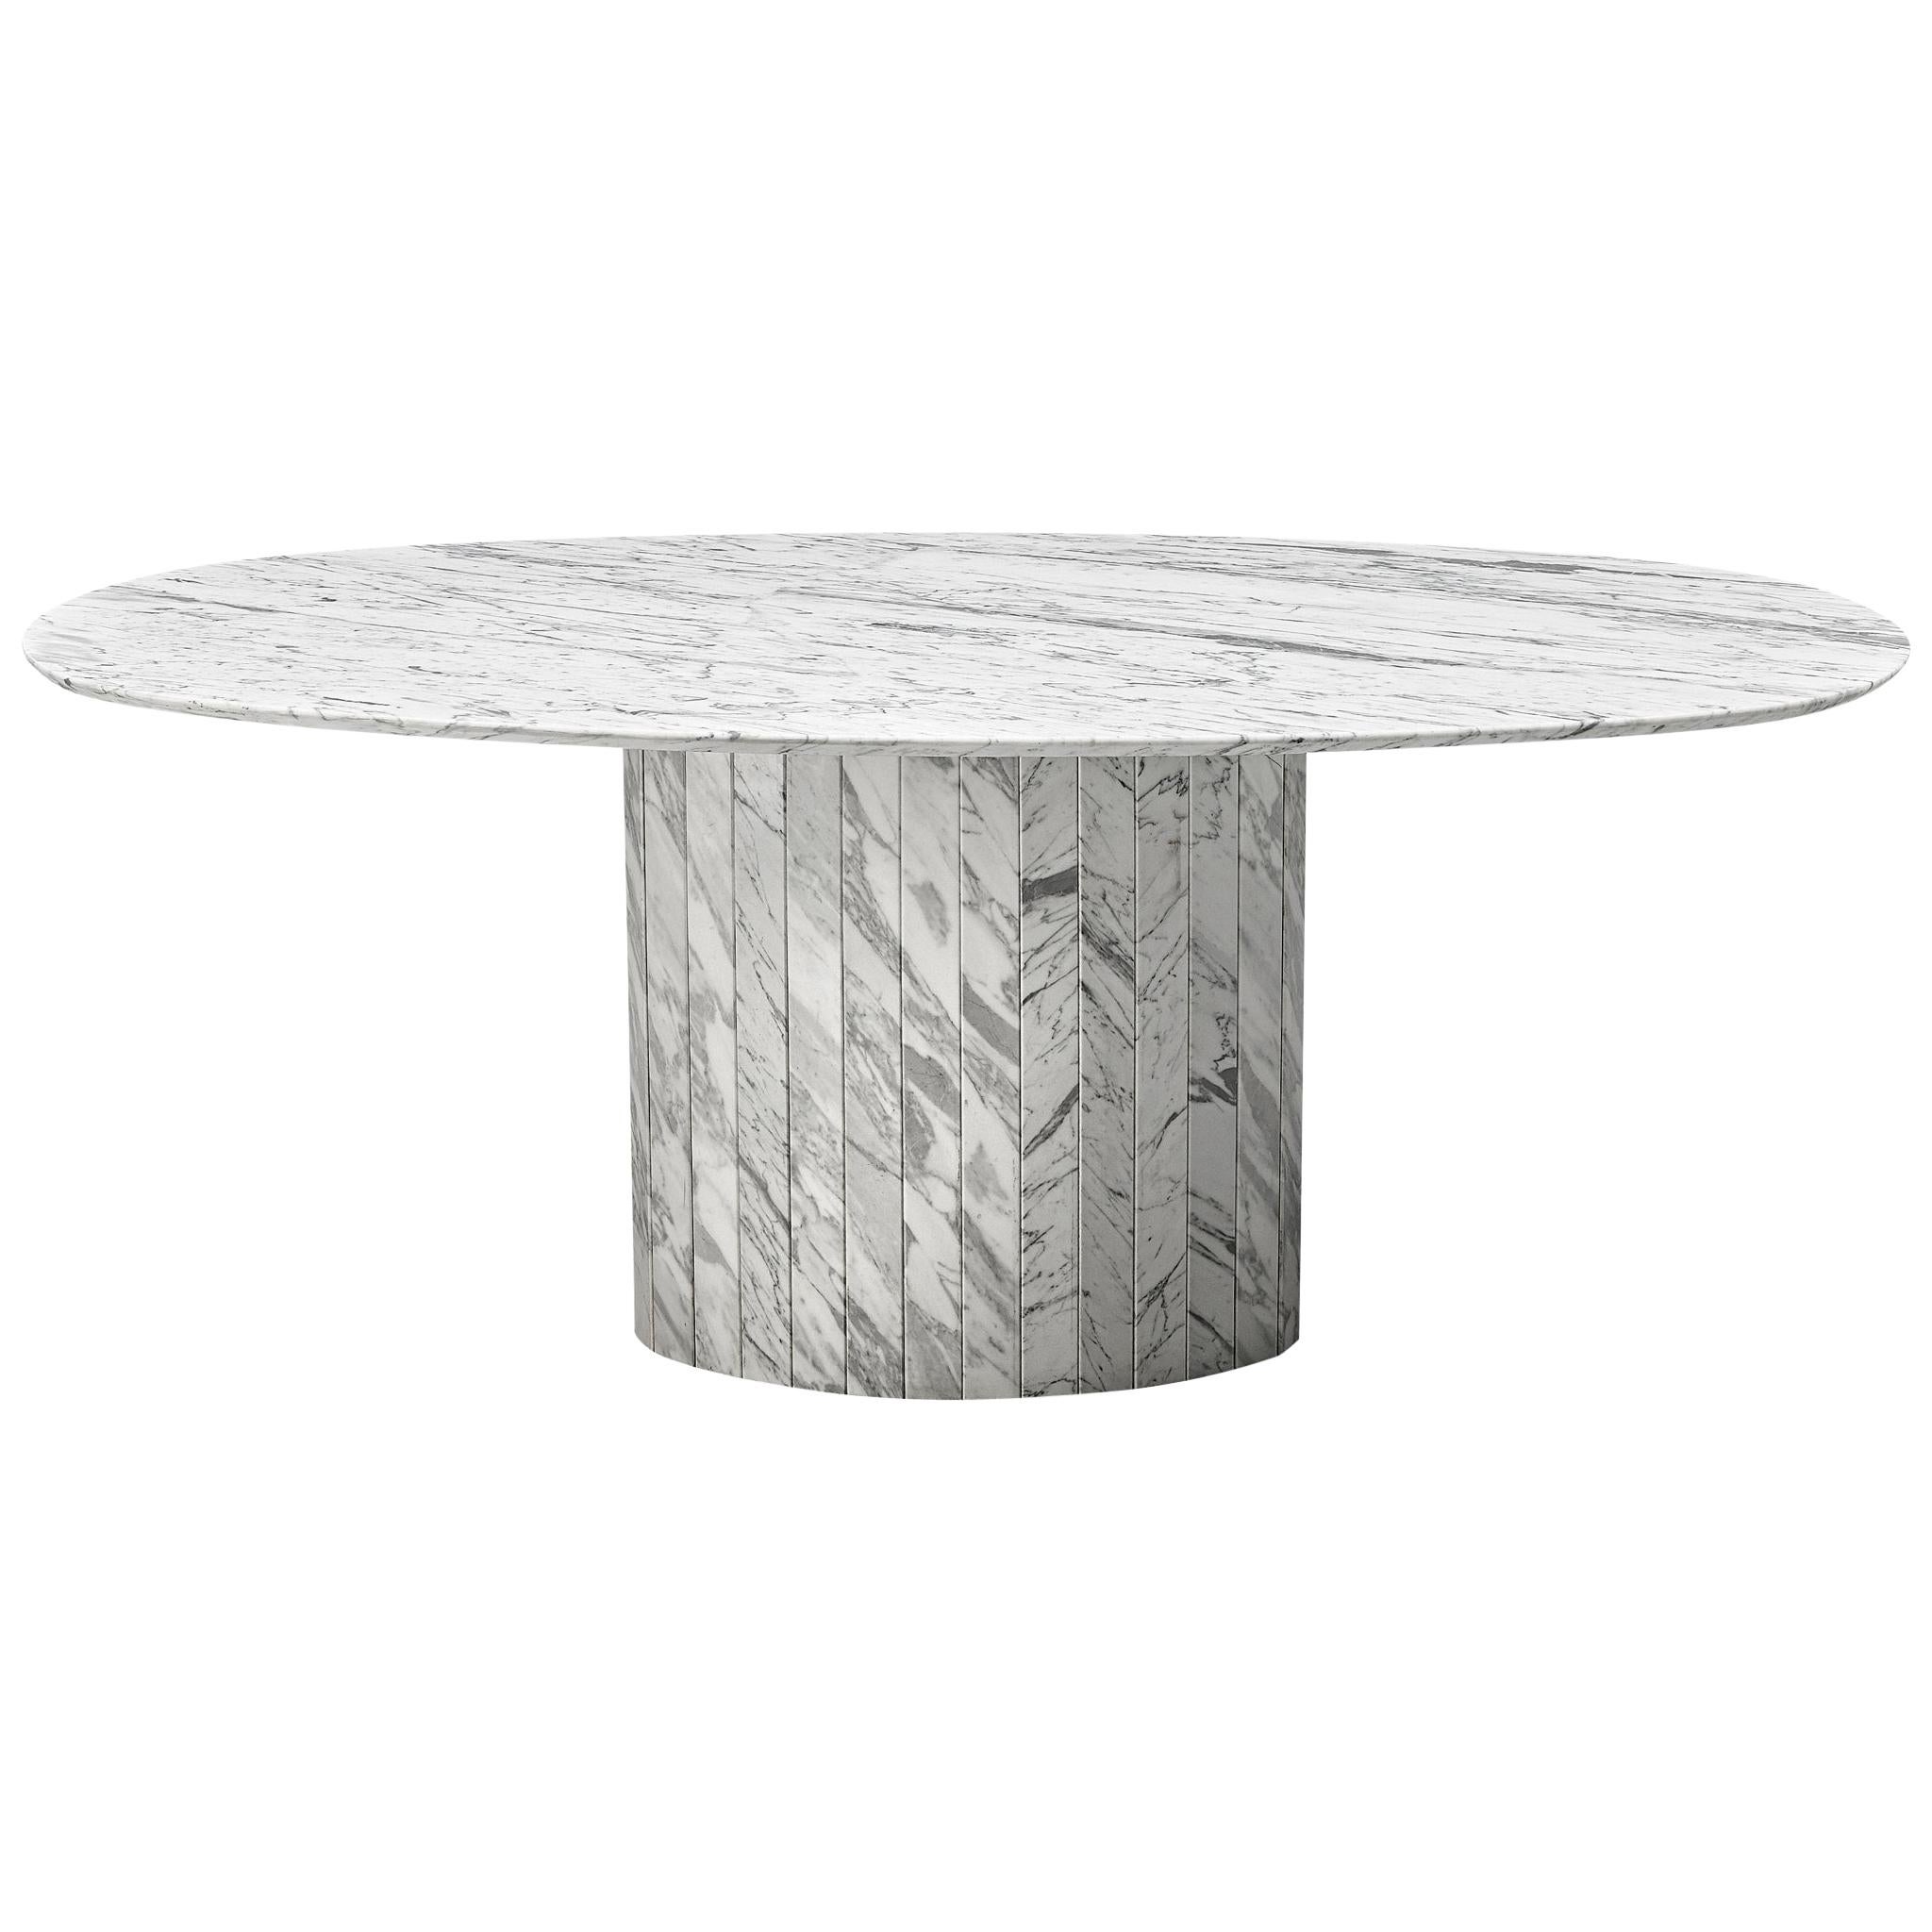 Sculptural Pedestal Table with Oval Top in Marble